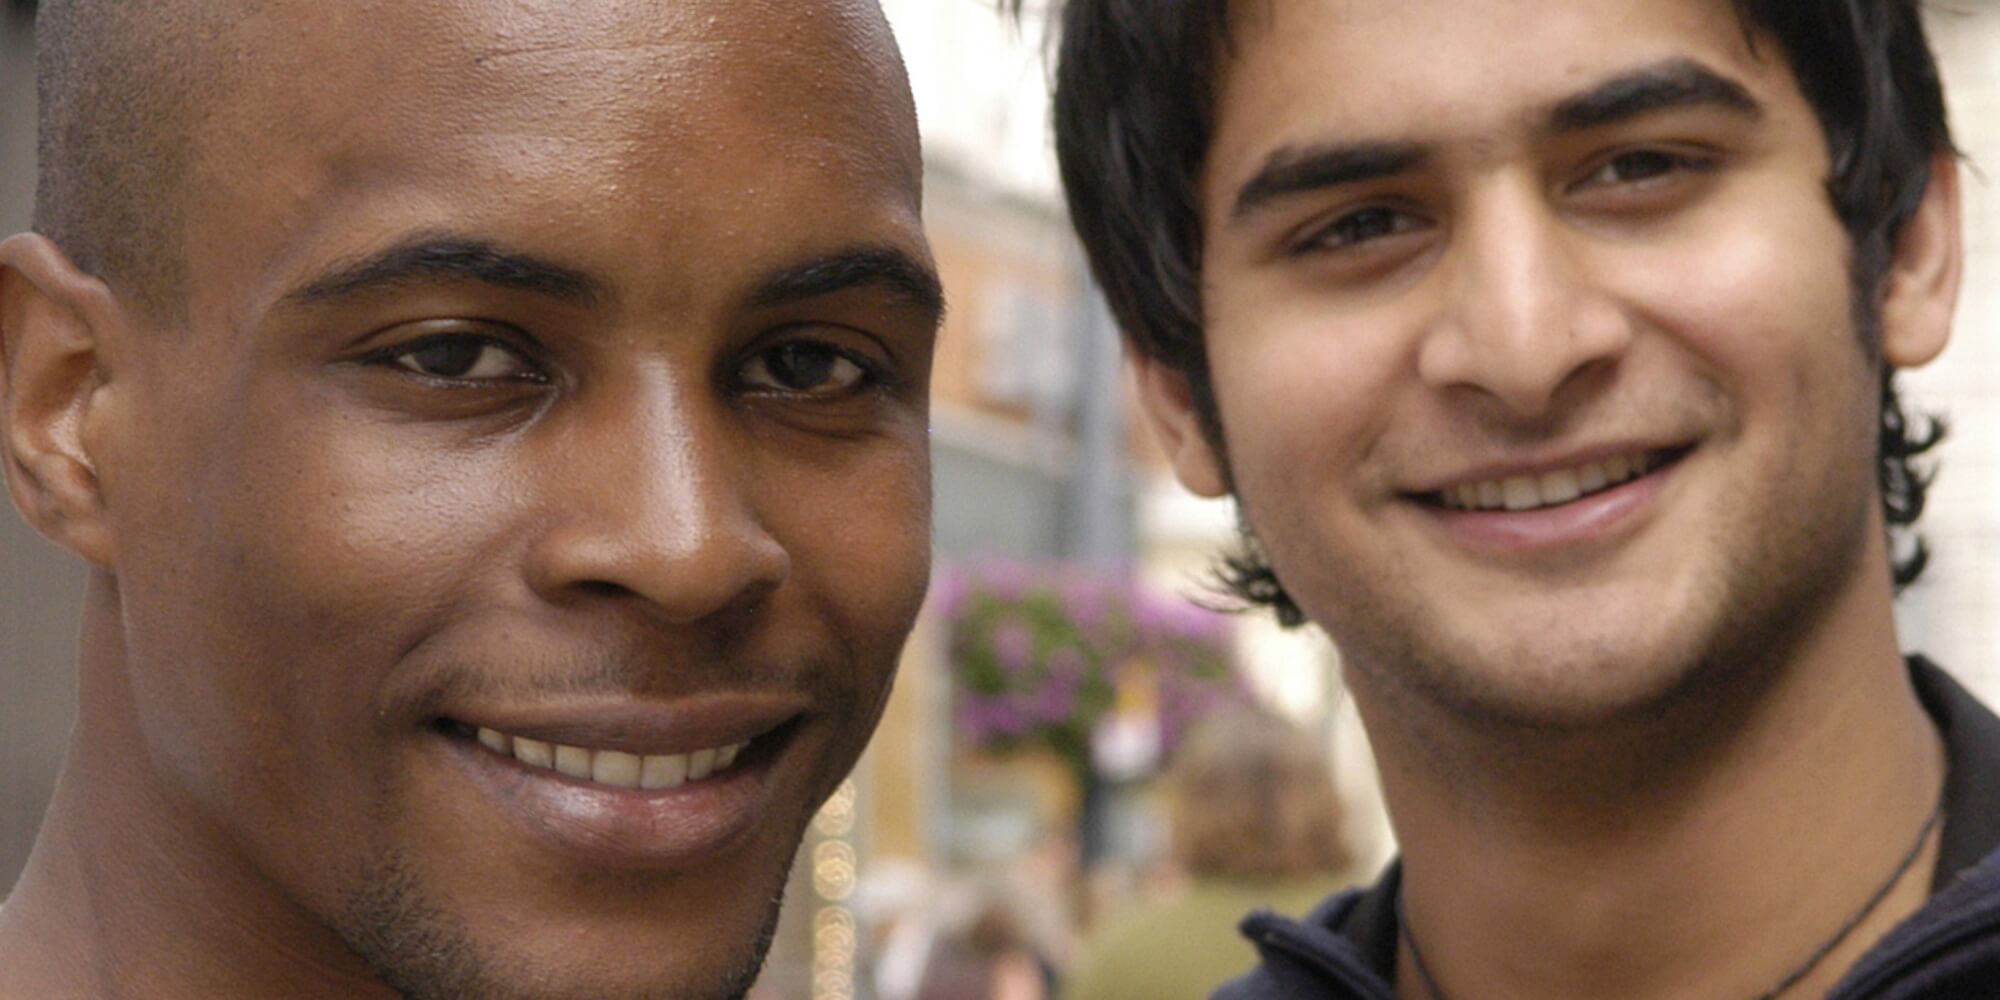 Image showing two young men smiling at the camera